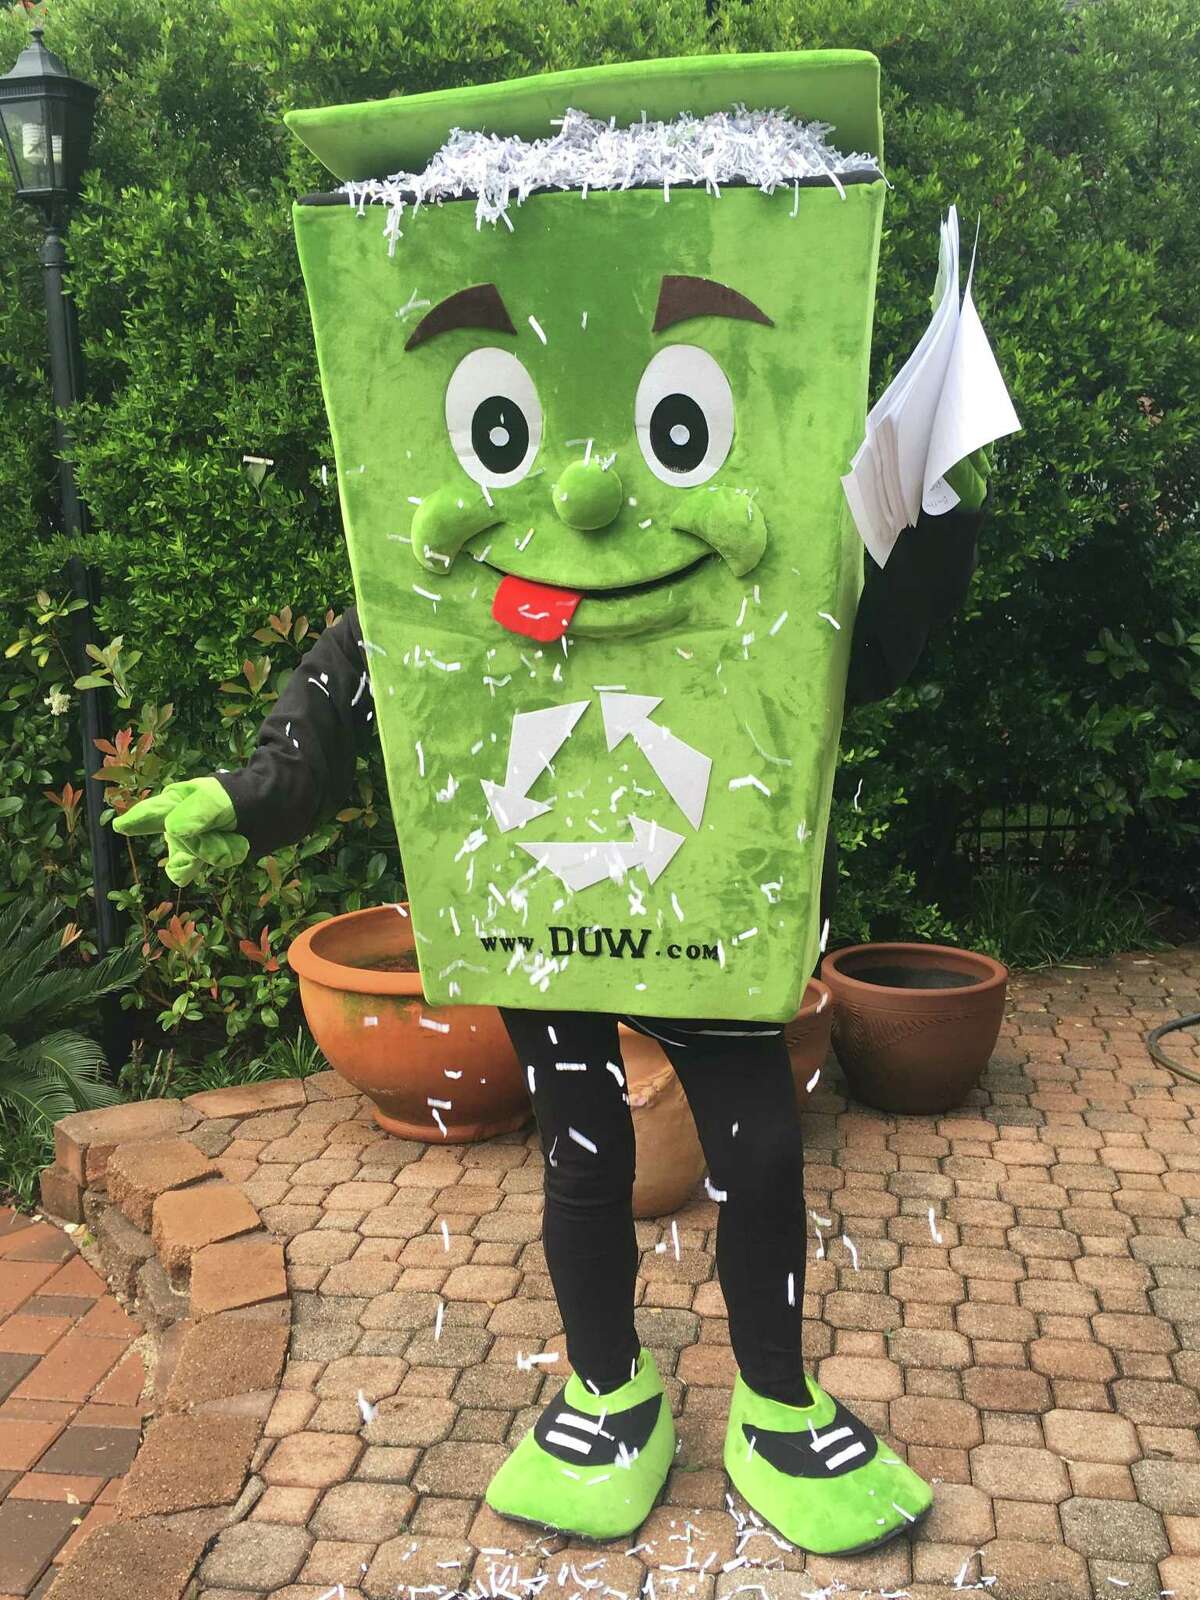 Mycle Recycle, Missouri City Green's mascot, invites people to participate in Missouri City Green's Shredding Event on April 28 from 9 a.m.-noon at Public Safety Headquarters, 3849 Cartwright Road, Missouri City. Visit www.missouricitygreen.org for information.